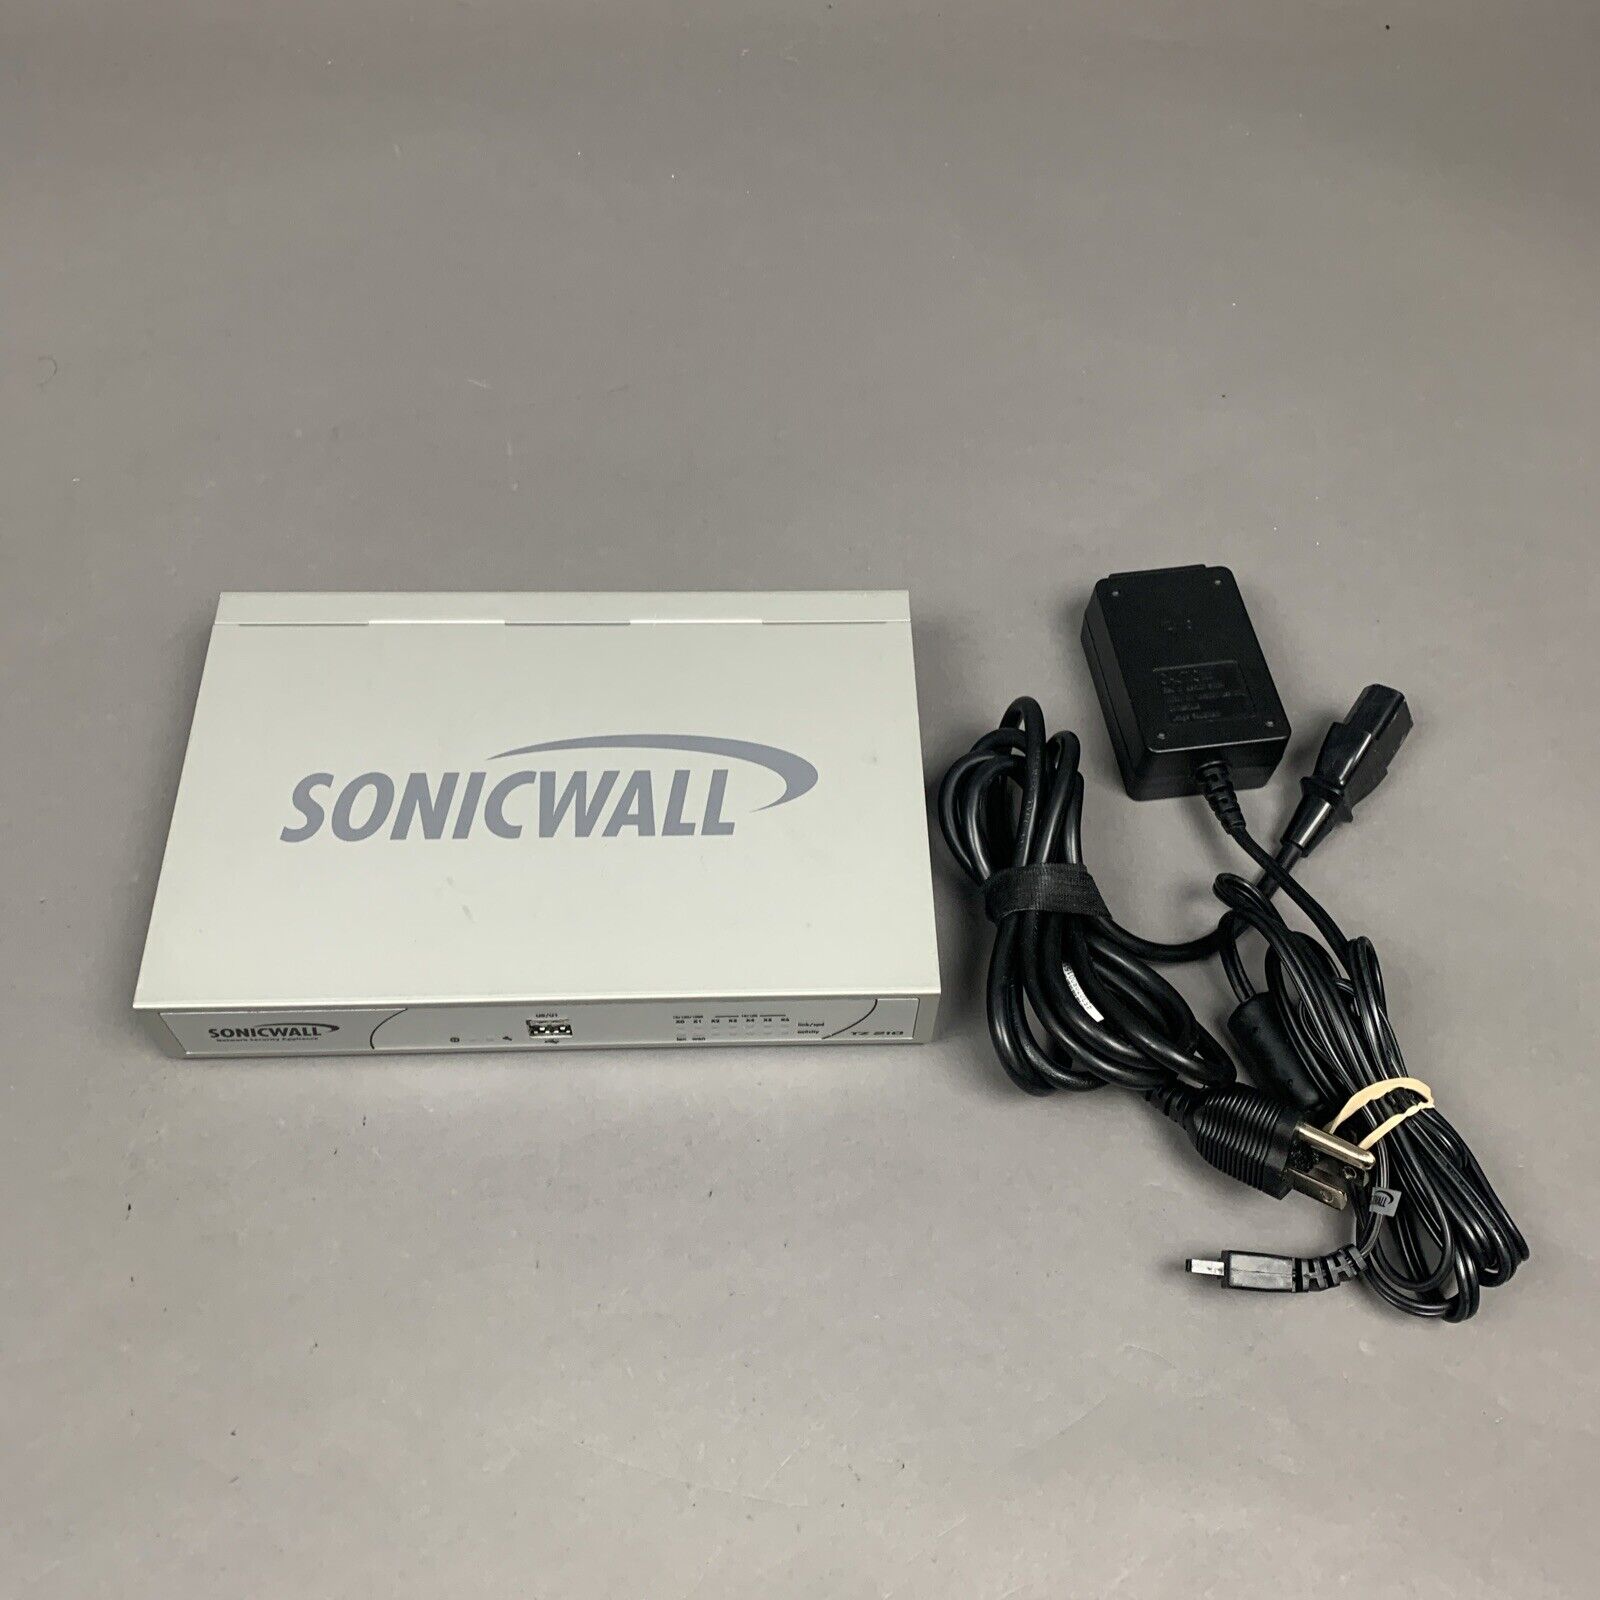 Sonicwall TZ 210 Network Security Appliance Model/Type APL20-063 D-11178 w/ Cord